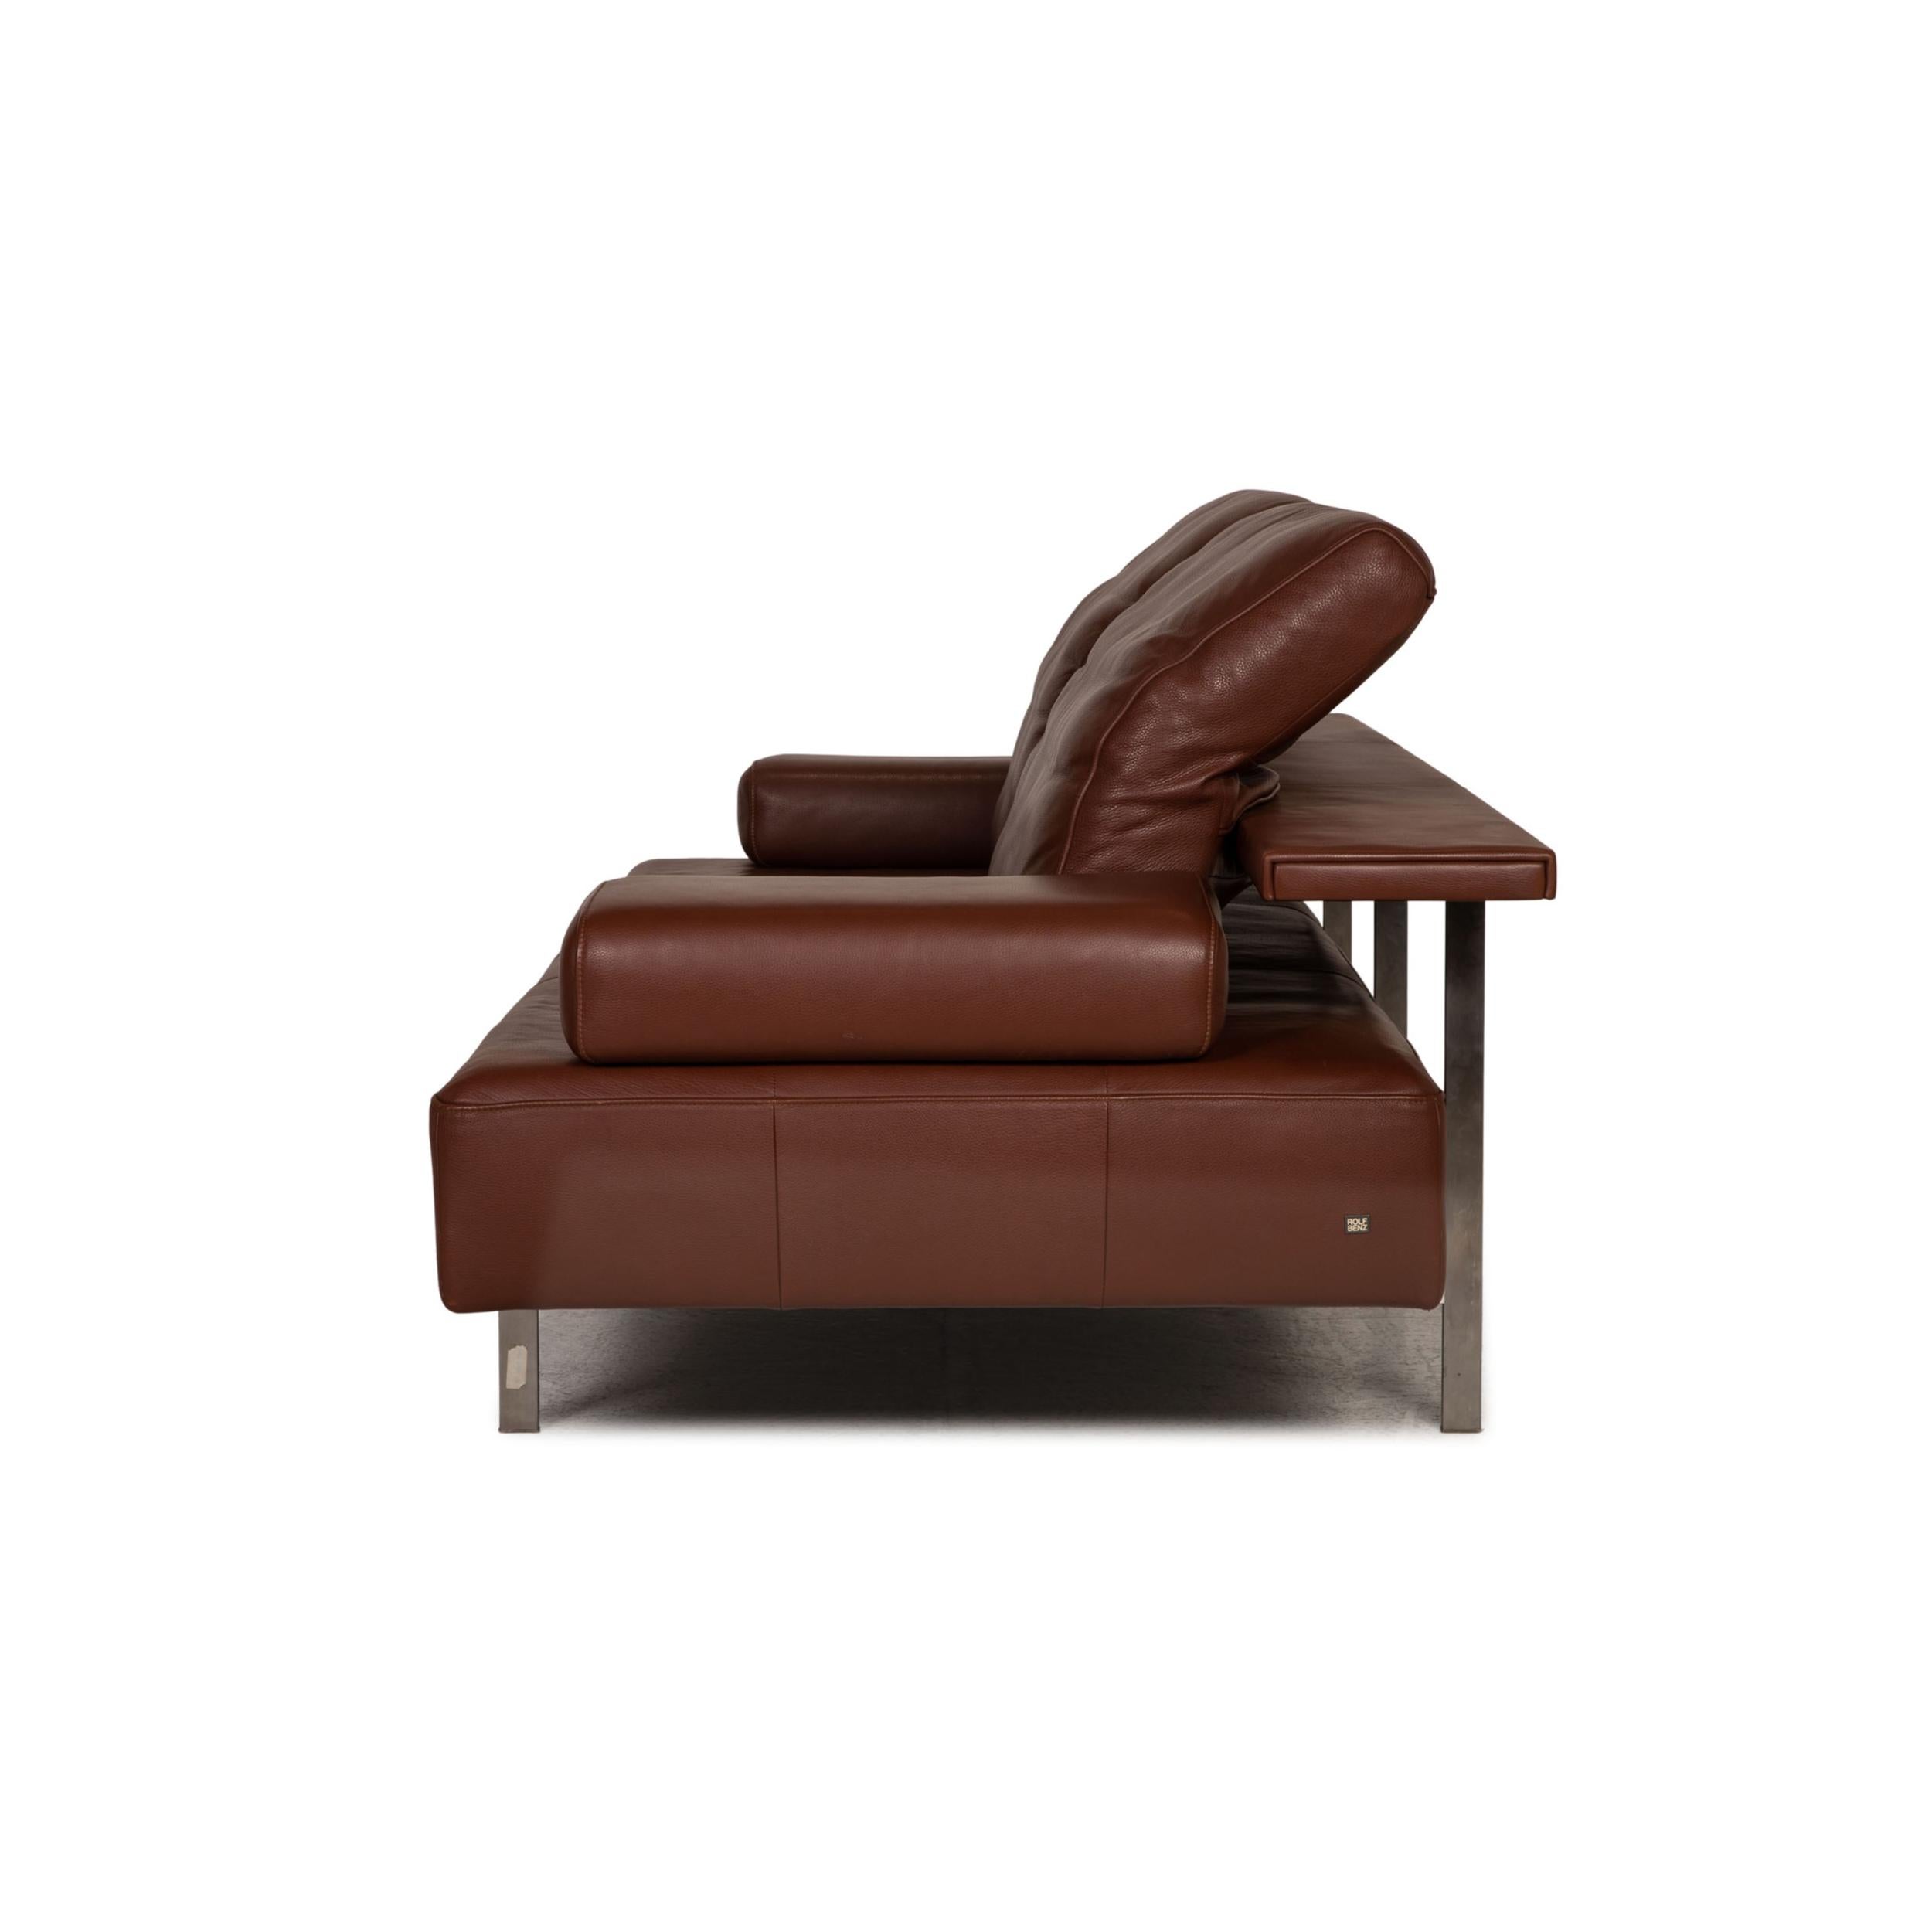 Rolf Benz Dono Leather Sofa Brown Three-Seater Couch Function For Sale 7